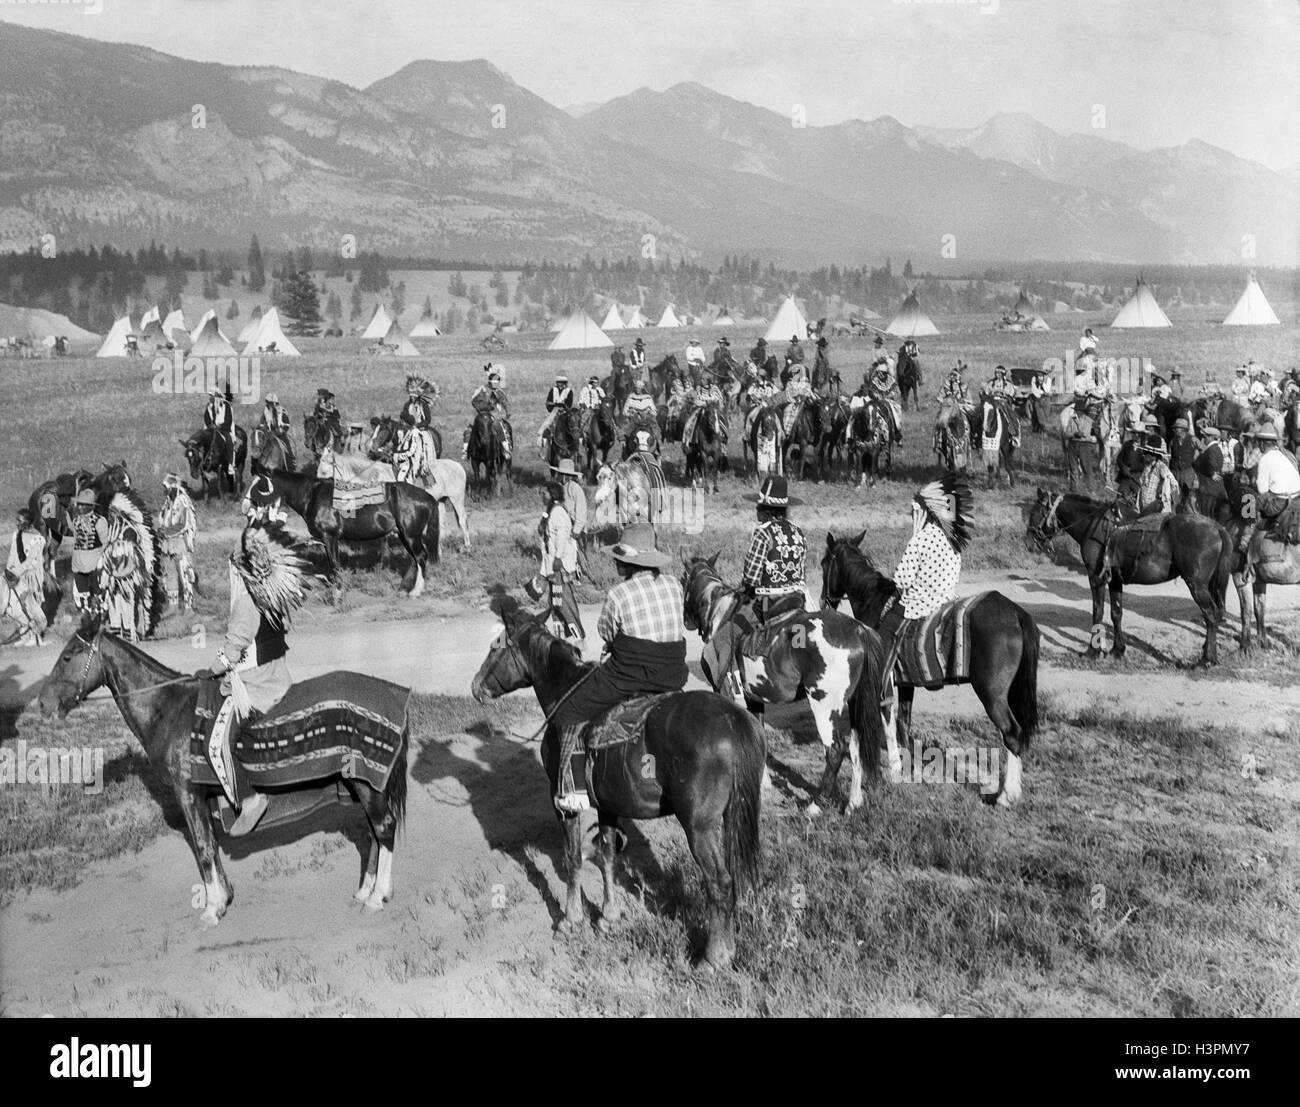 1920s LARGE GROUP OF NATIVE AMERICAN BLACKFOOT INDIANS MEETING BY VILLAGE ON HORSEBACK BRITISH COLUMBIA CANADA Stock Photo